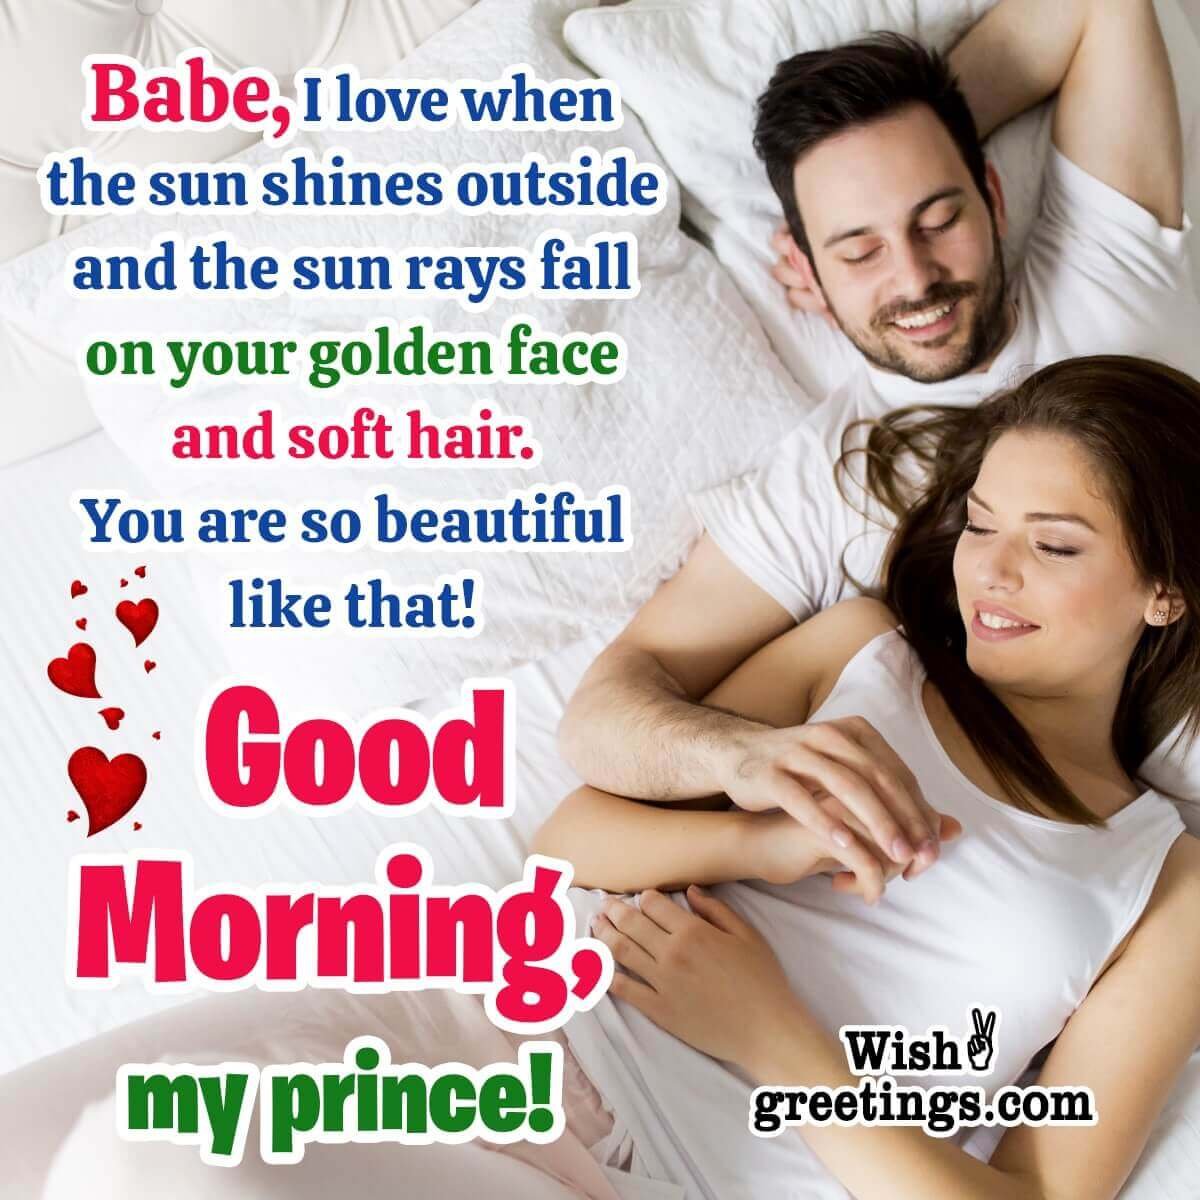 Good Morning Messages for Boyfriend